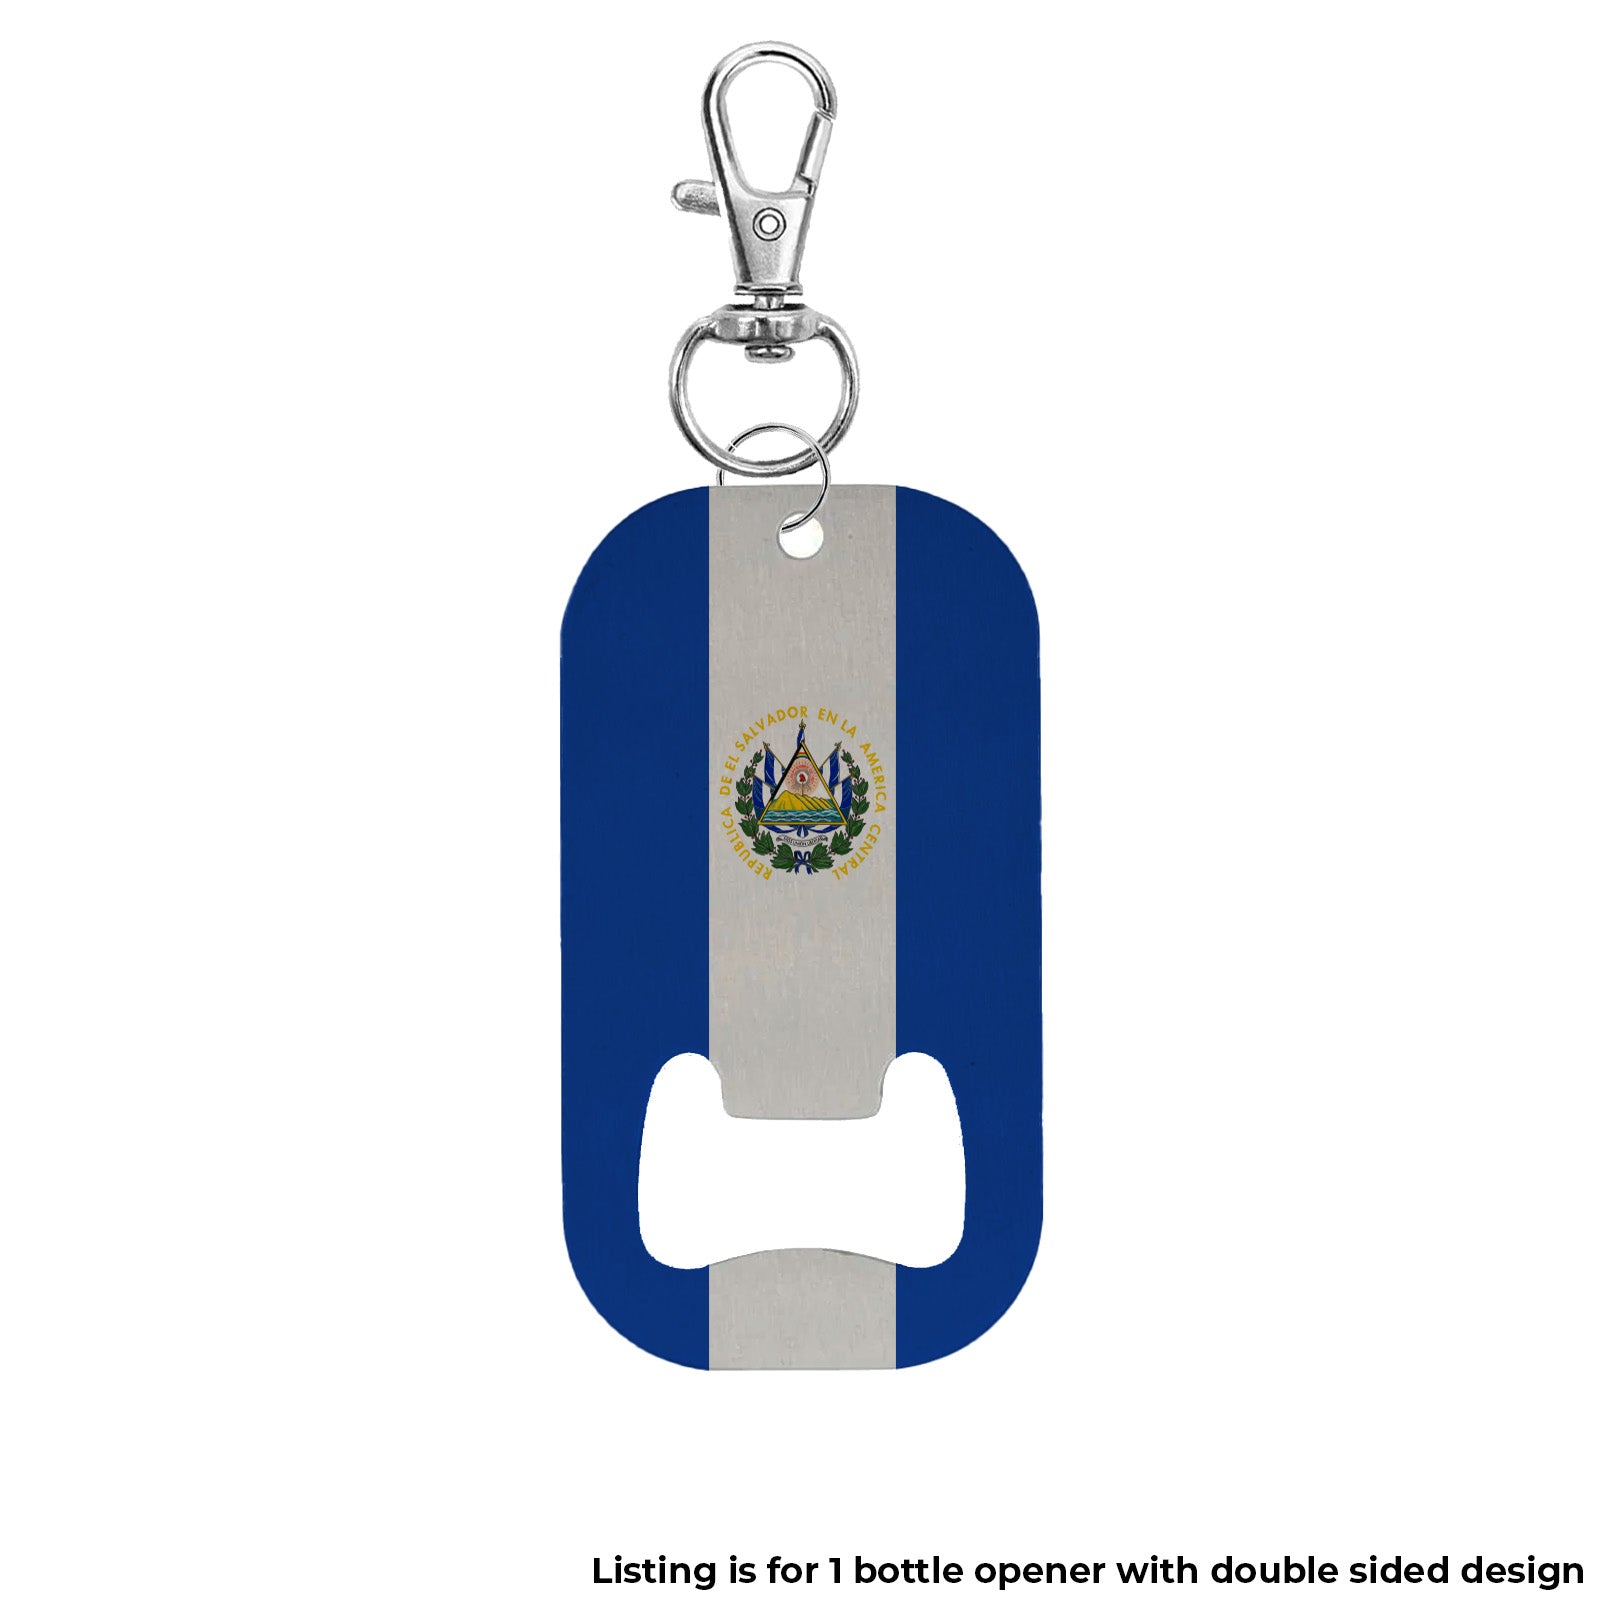 Pick Your World Flag Stainless Steel Keychain Bottle Opener - Personalized with Your Name